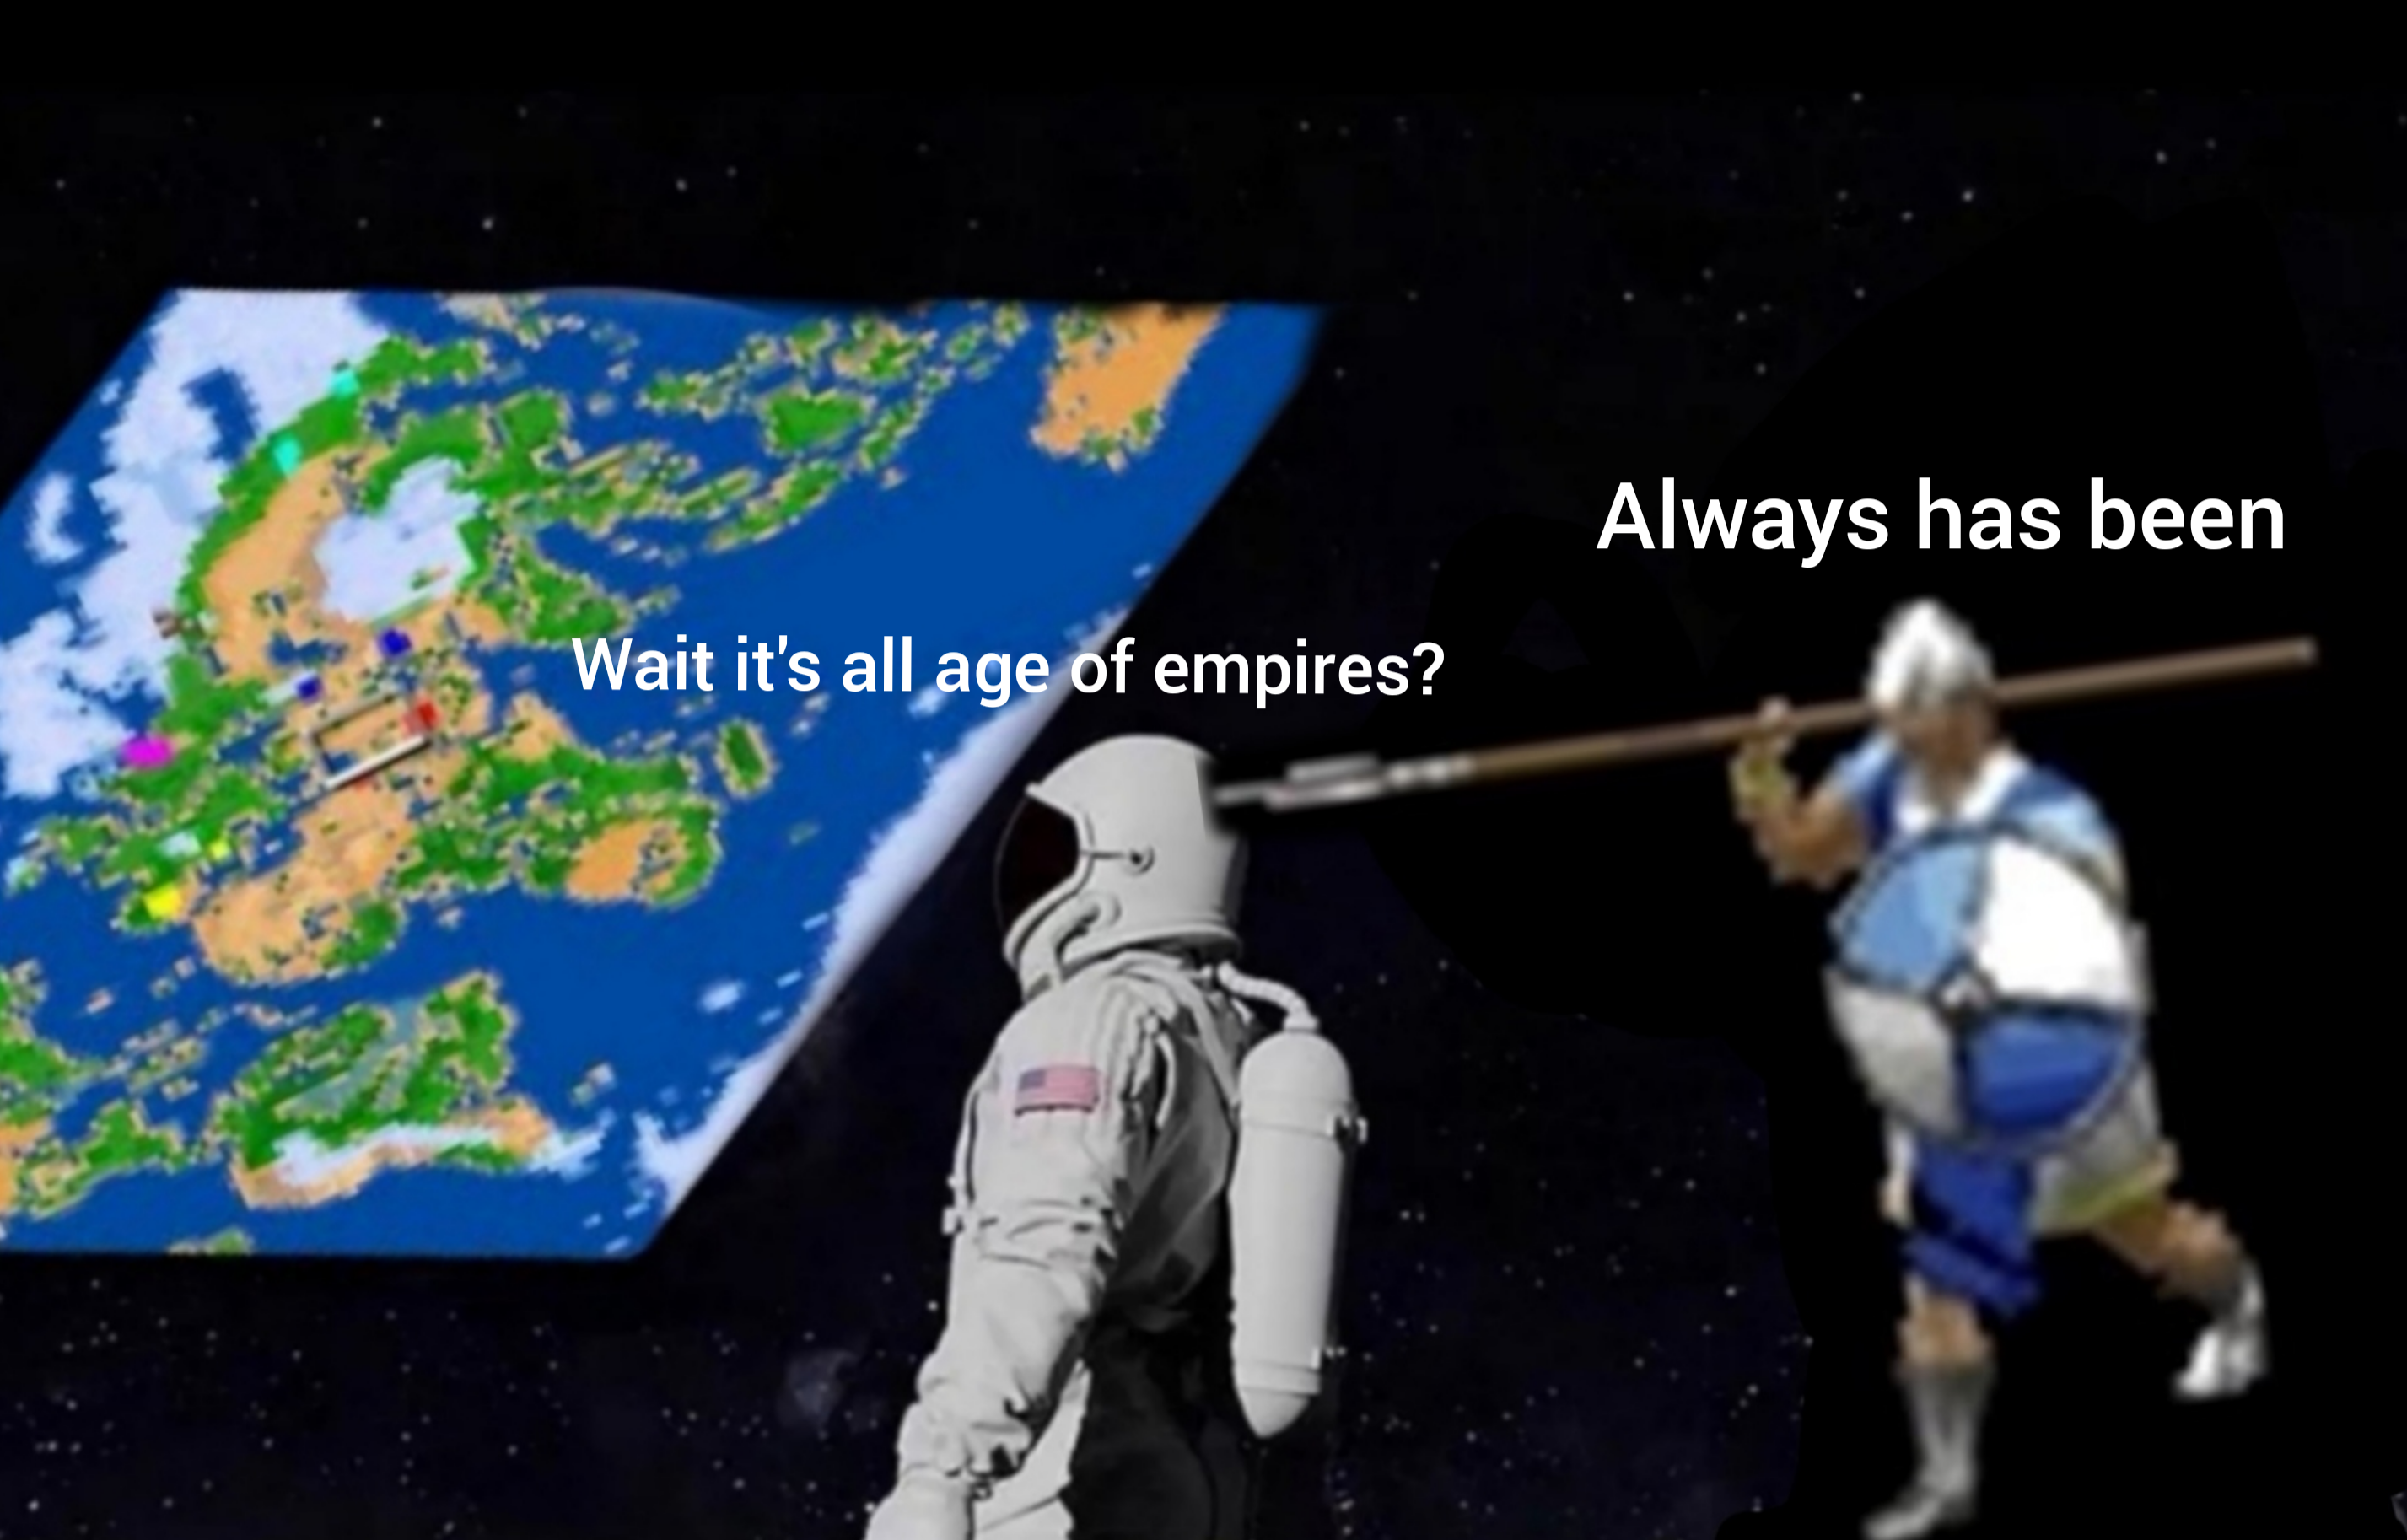 its all age of empires meme, its all age of empires astronaut meme